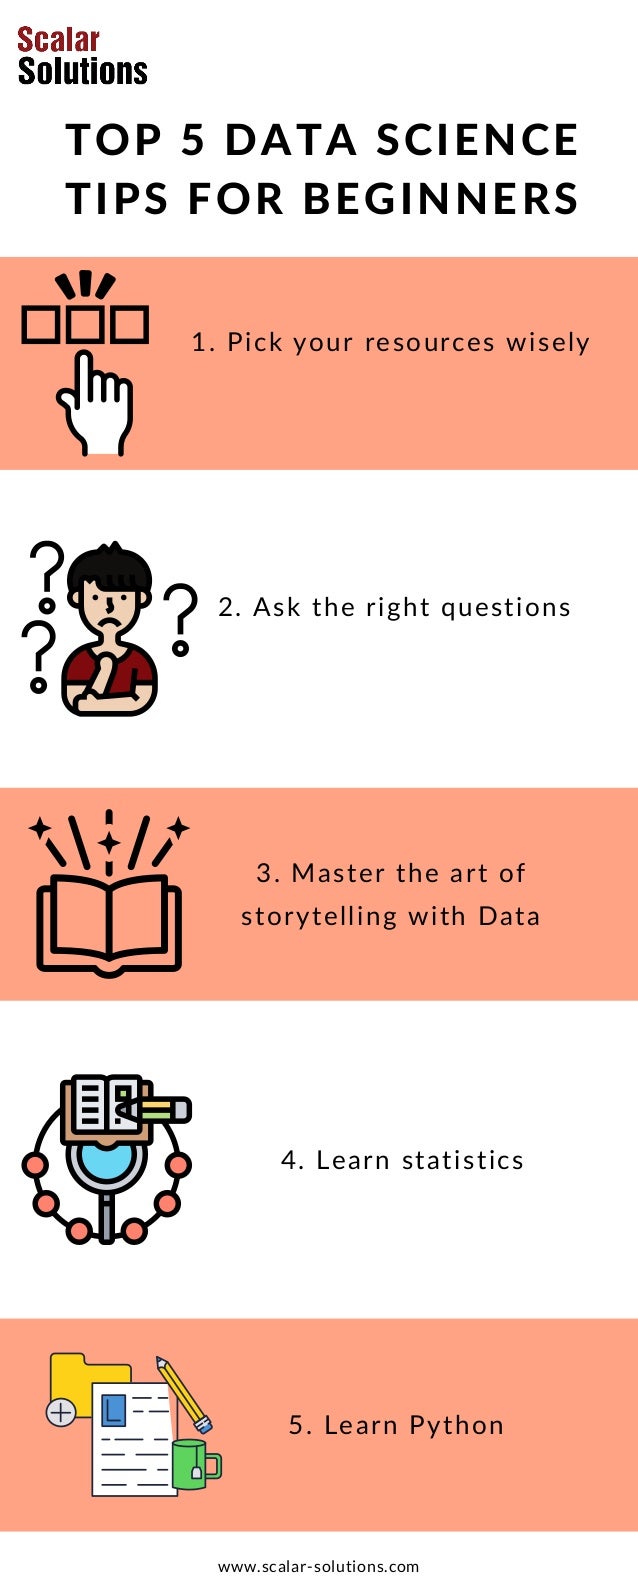 TOP 5 DATA SCIENCE
TIPS FOR BEGINNERS
Pick your resources wisely
1.
2. Ask the right questions
3. Master the art of
storytelling with Data
4. Learn statistics
5. Learn Python
www.scalar-solutions.com
 